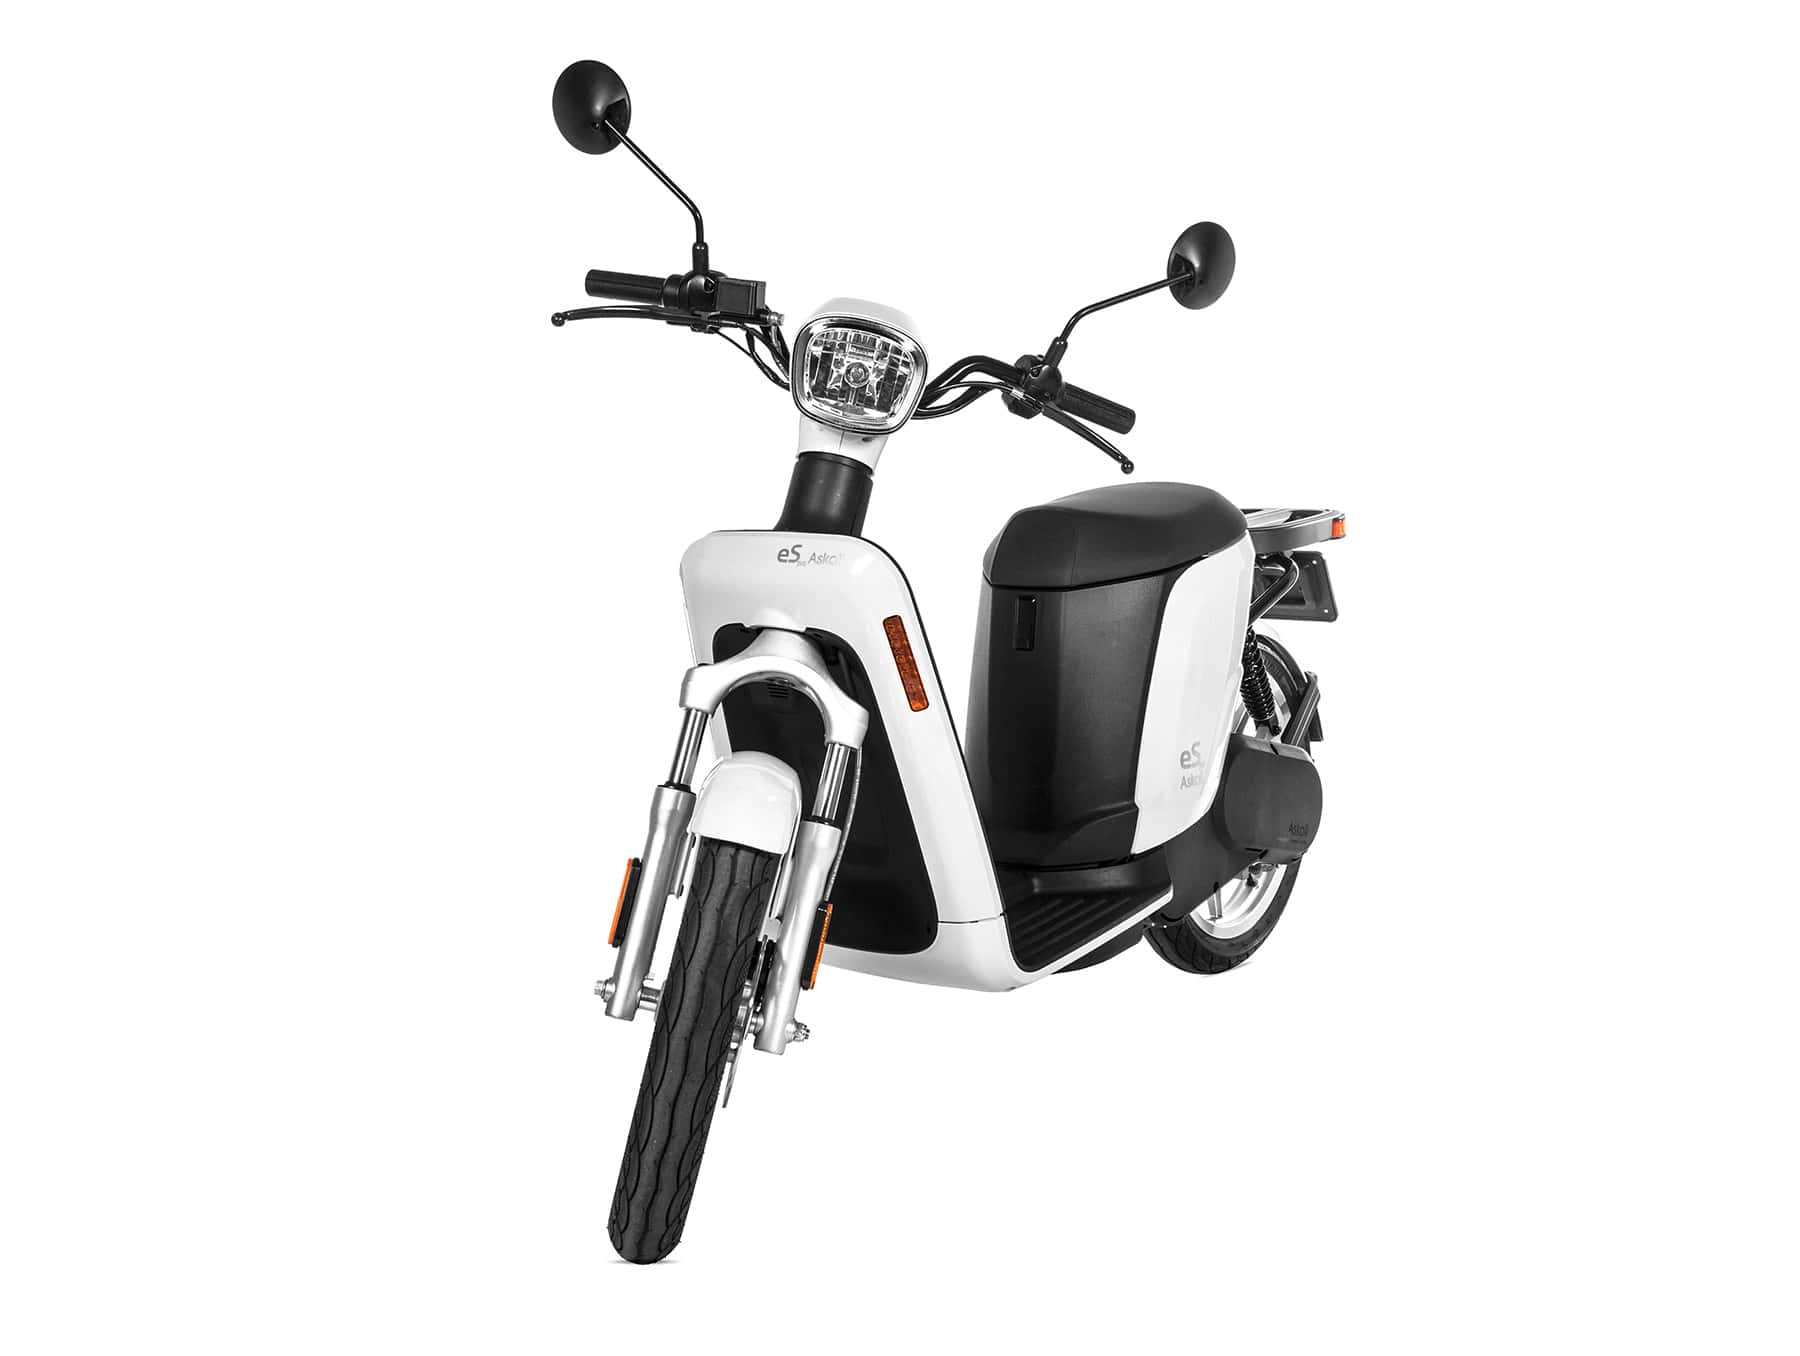 front view image, white Askoll espro70 e-moped for delivery rider rentals